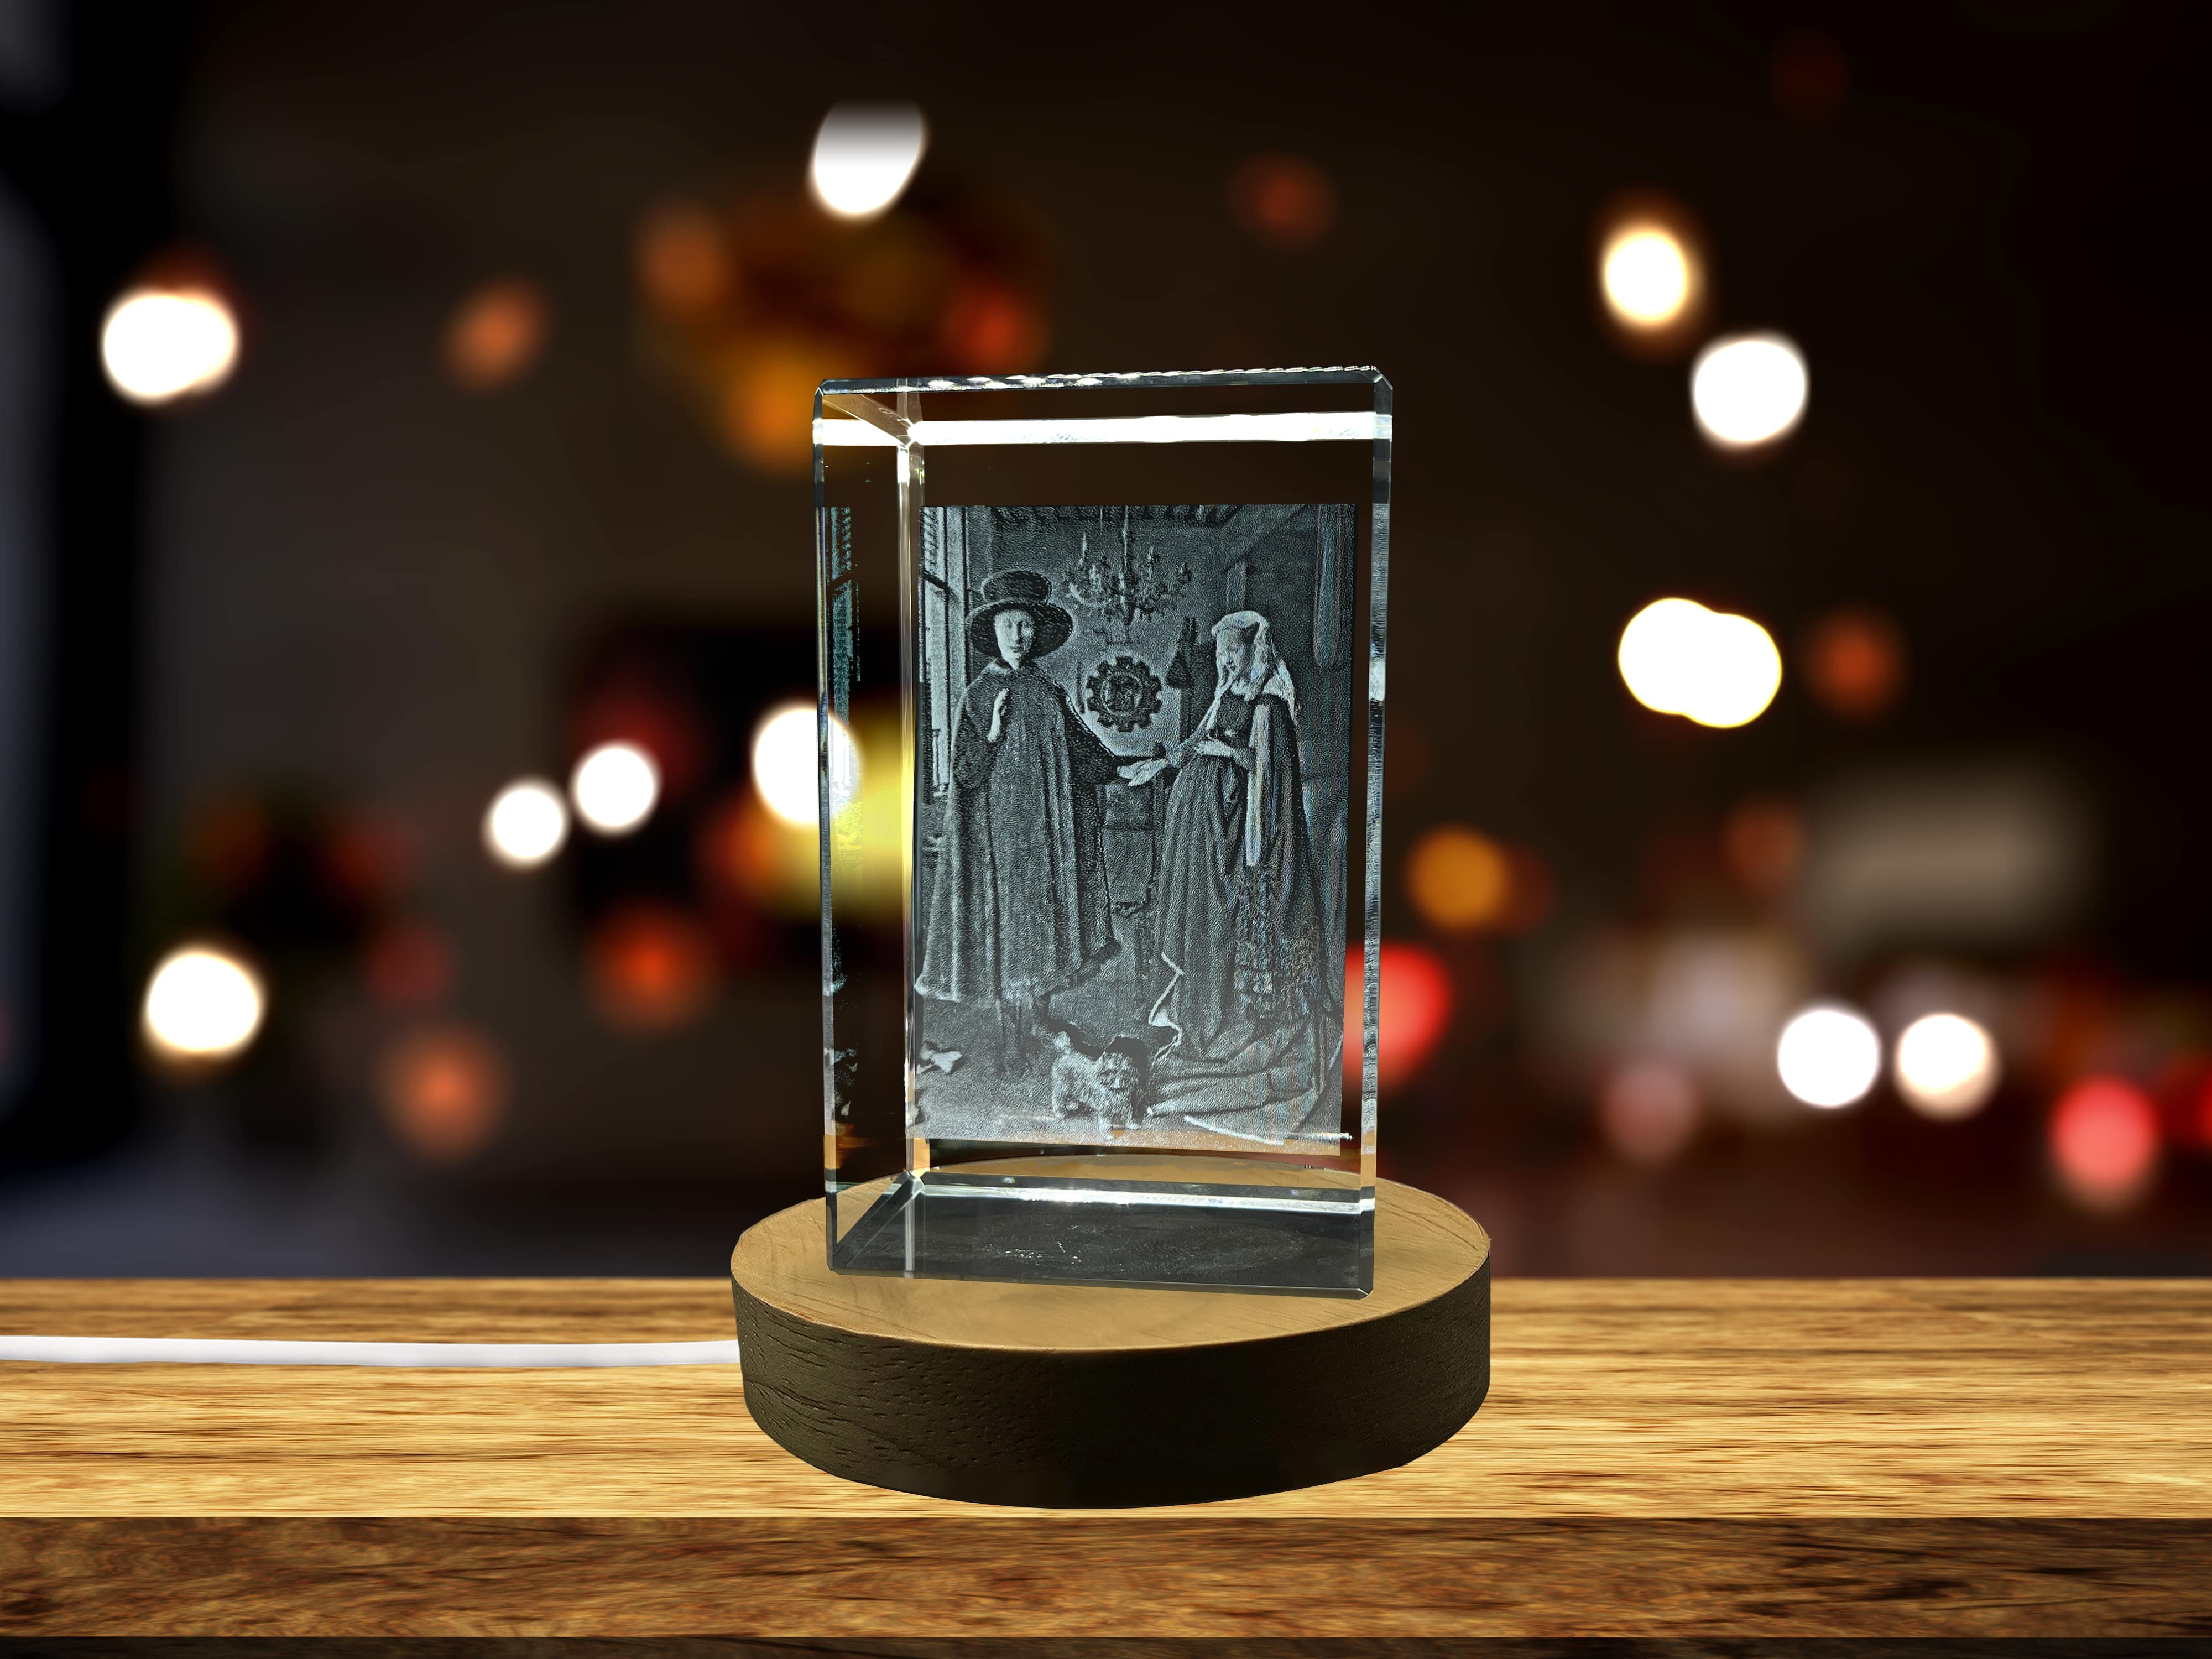 The Arnolfini Portrait 3D Engraved Crystal Decor A&B Crystal Collection